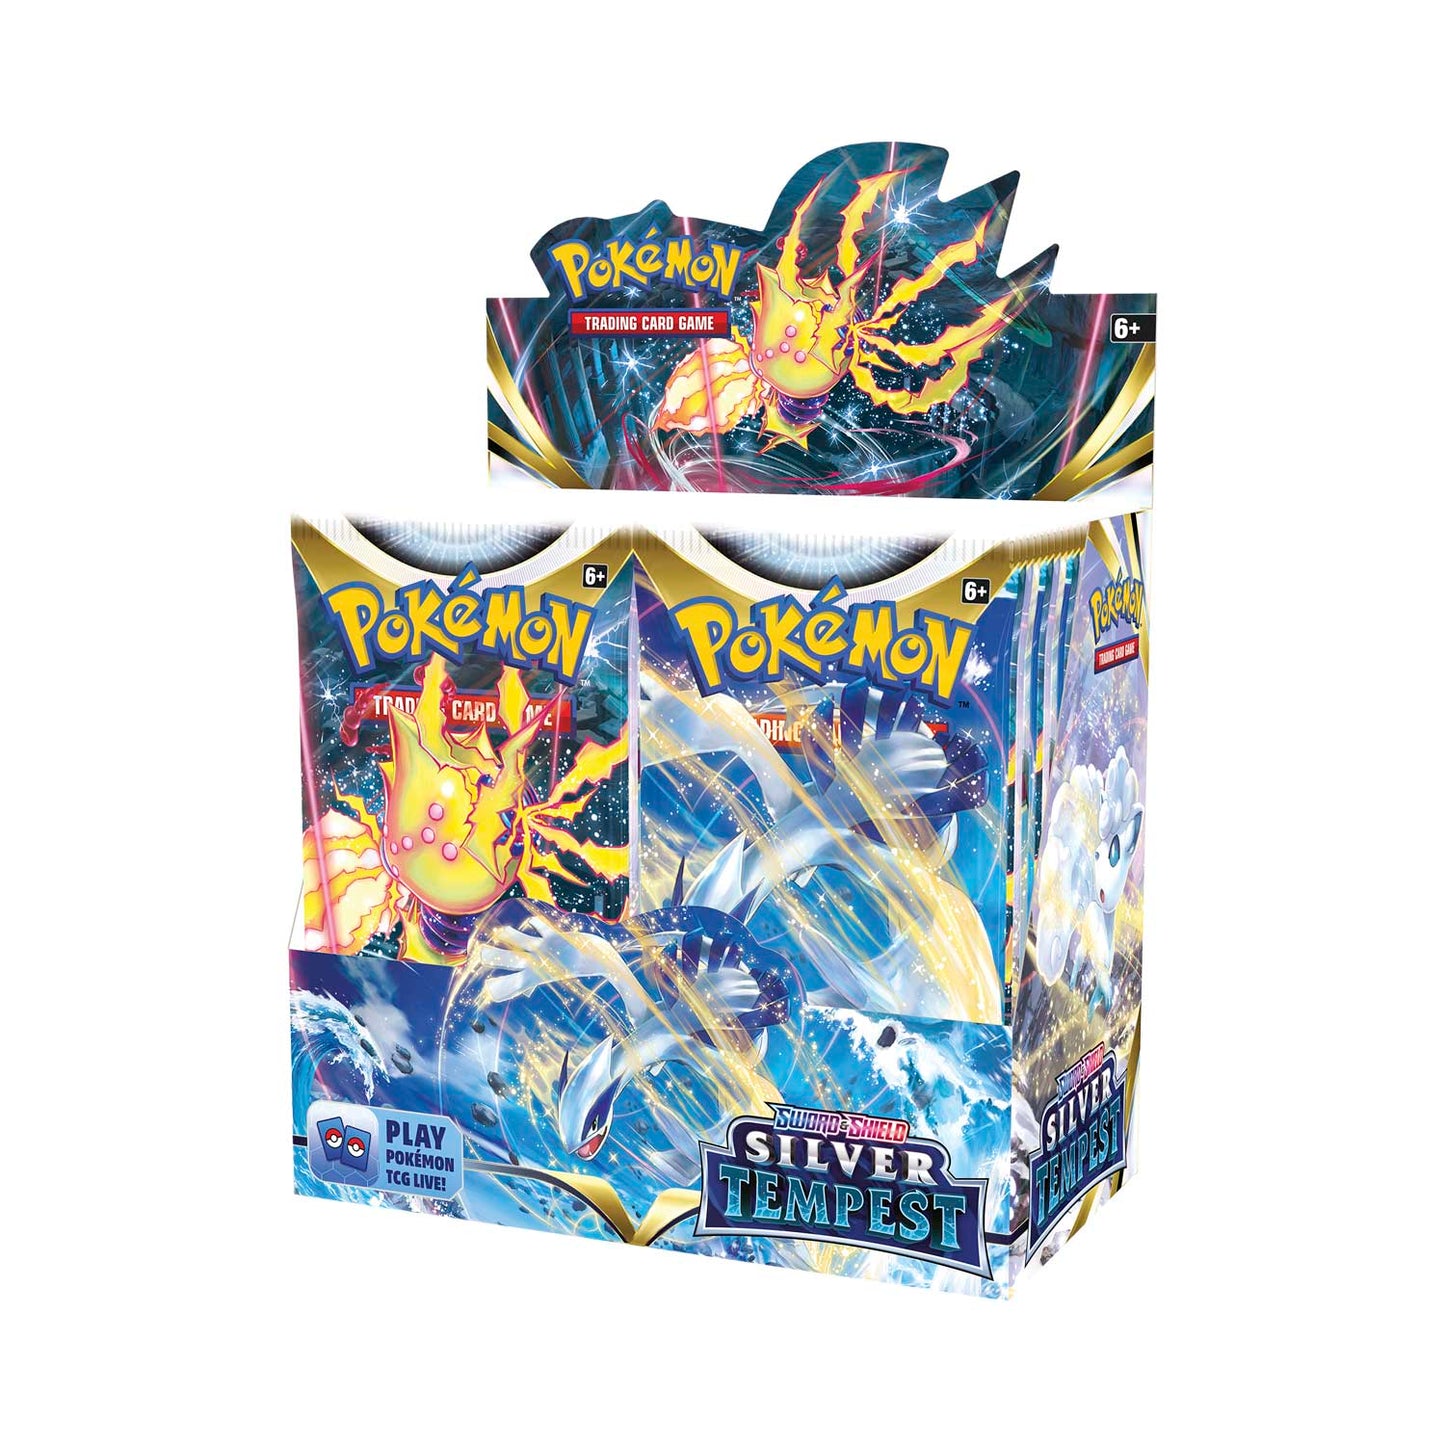 Pokémon Card Game Sword & Shield Silver Tempest Booster Box Official Factory Sealed